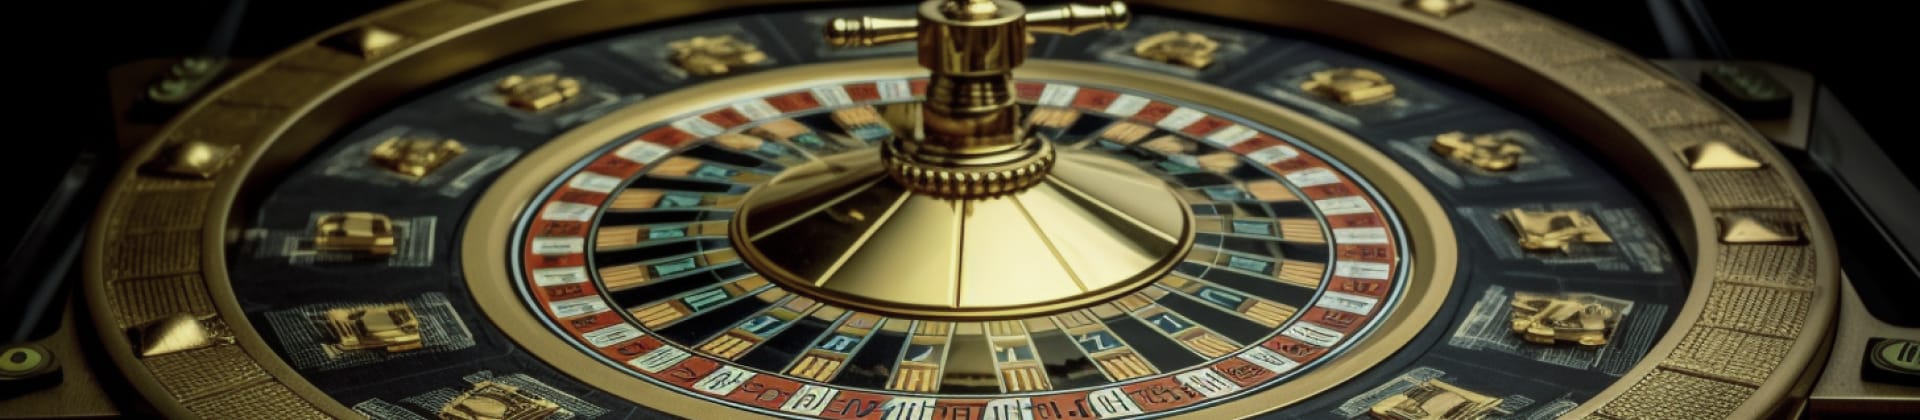 How you play with bitcoin on the roulette wheel